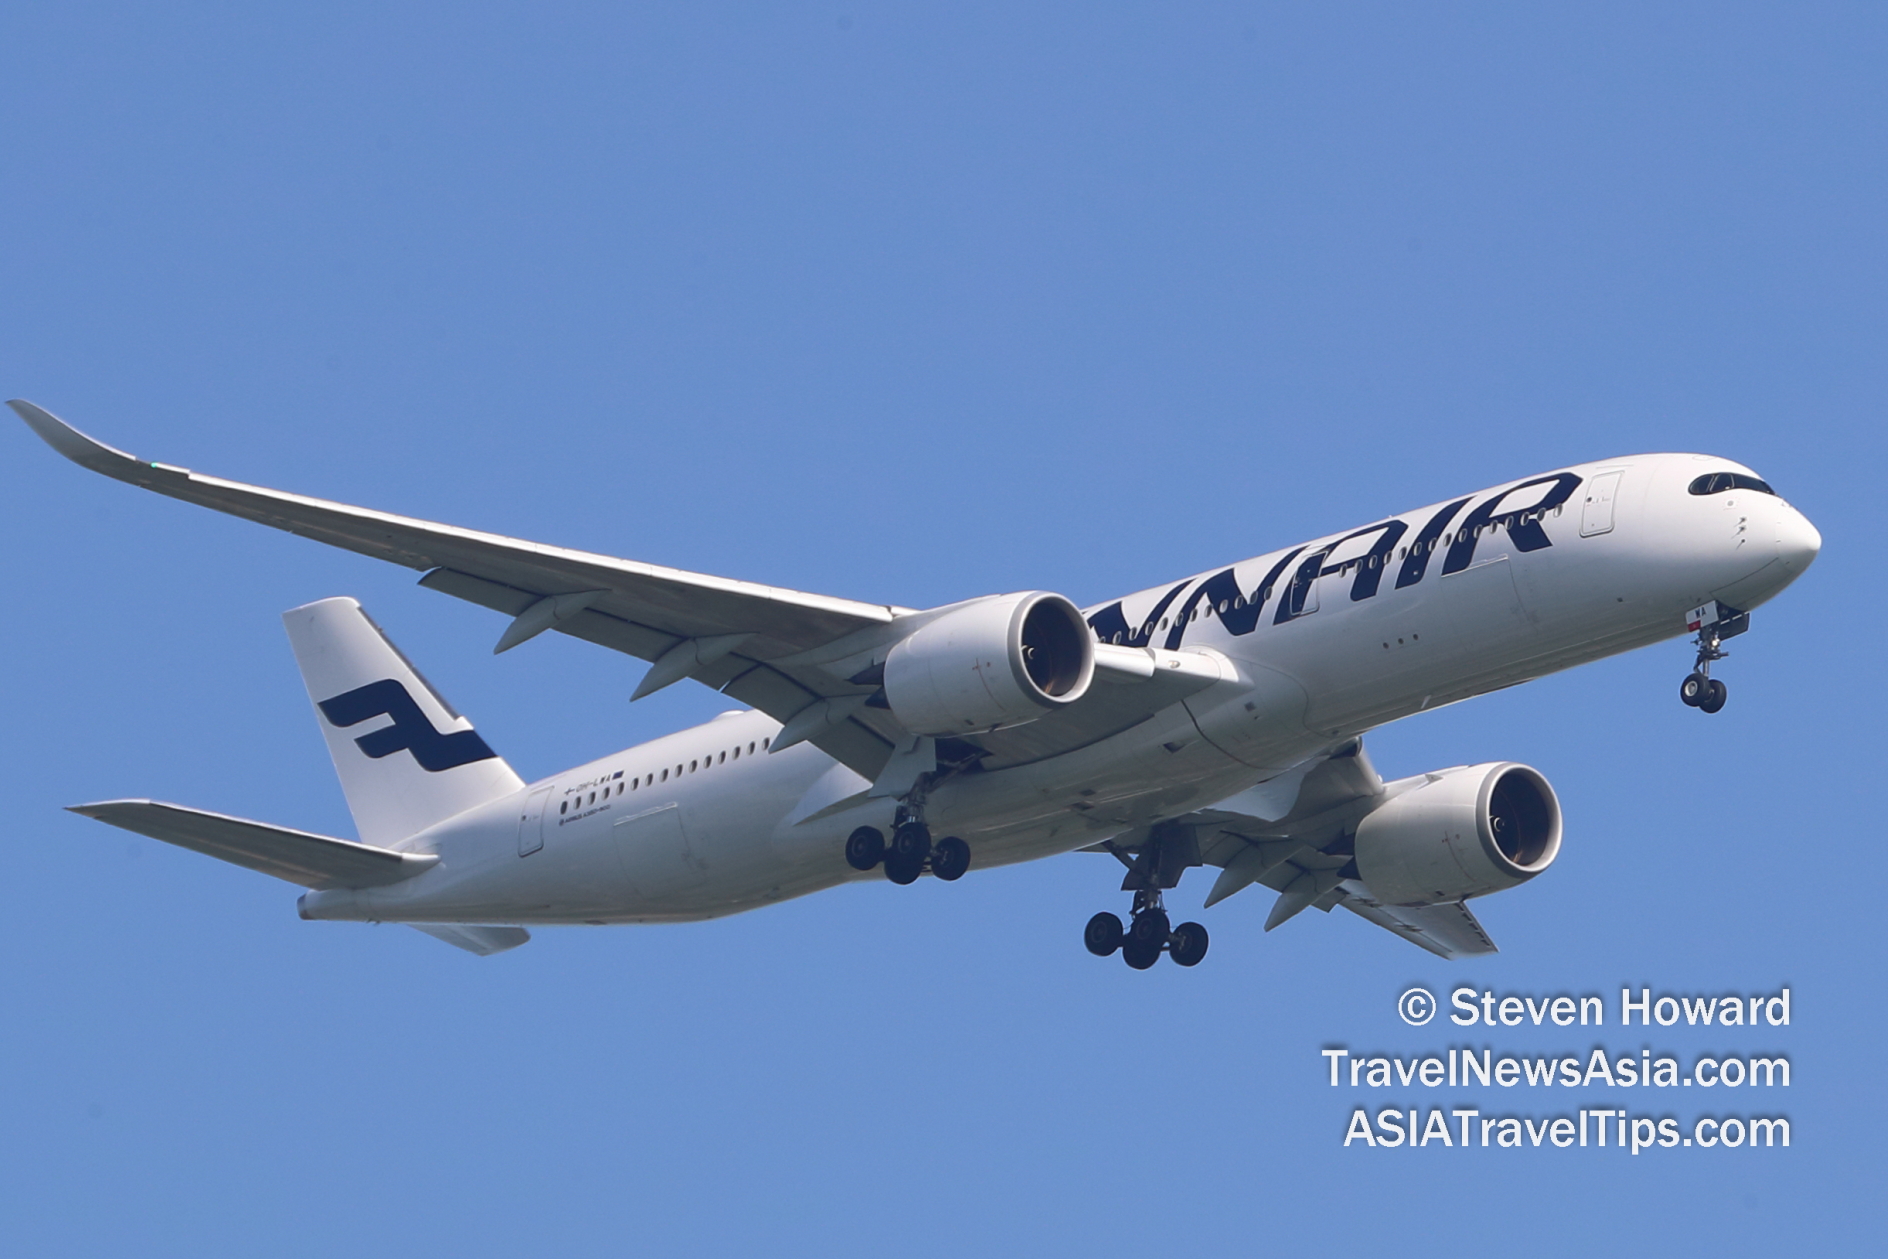 Finnair A350 reg: OH-LWA. Picture by Steven Howard of TravelNewsAsia.com Click to enlarge.